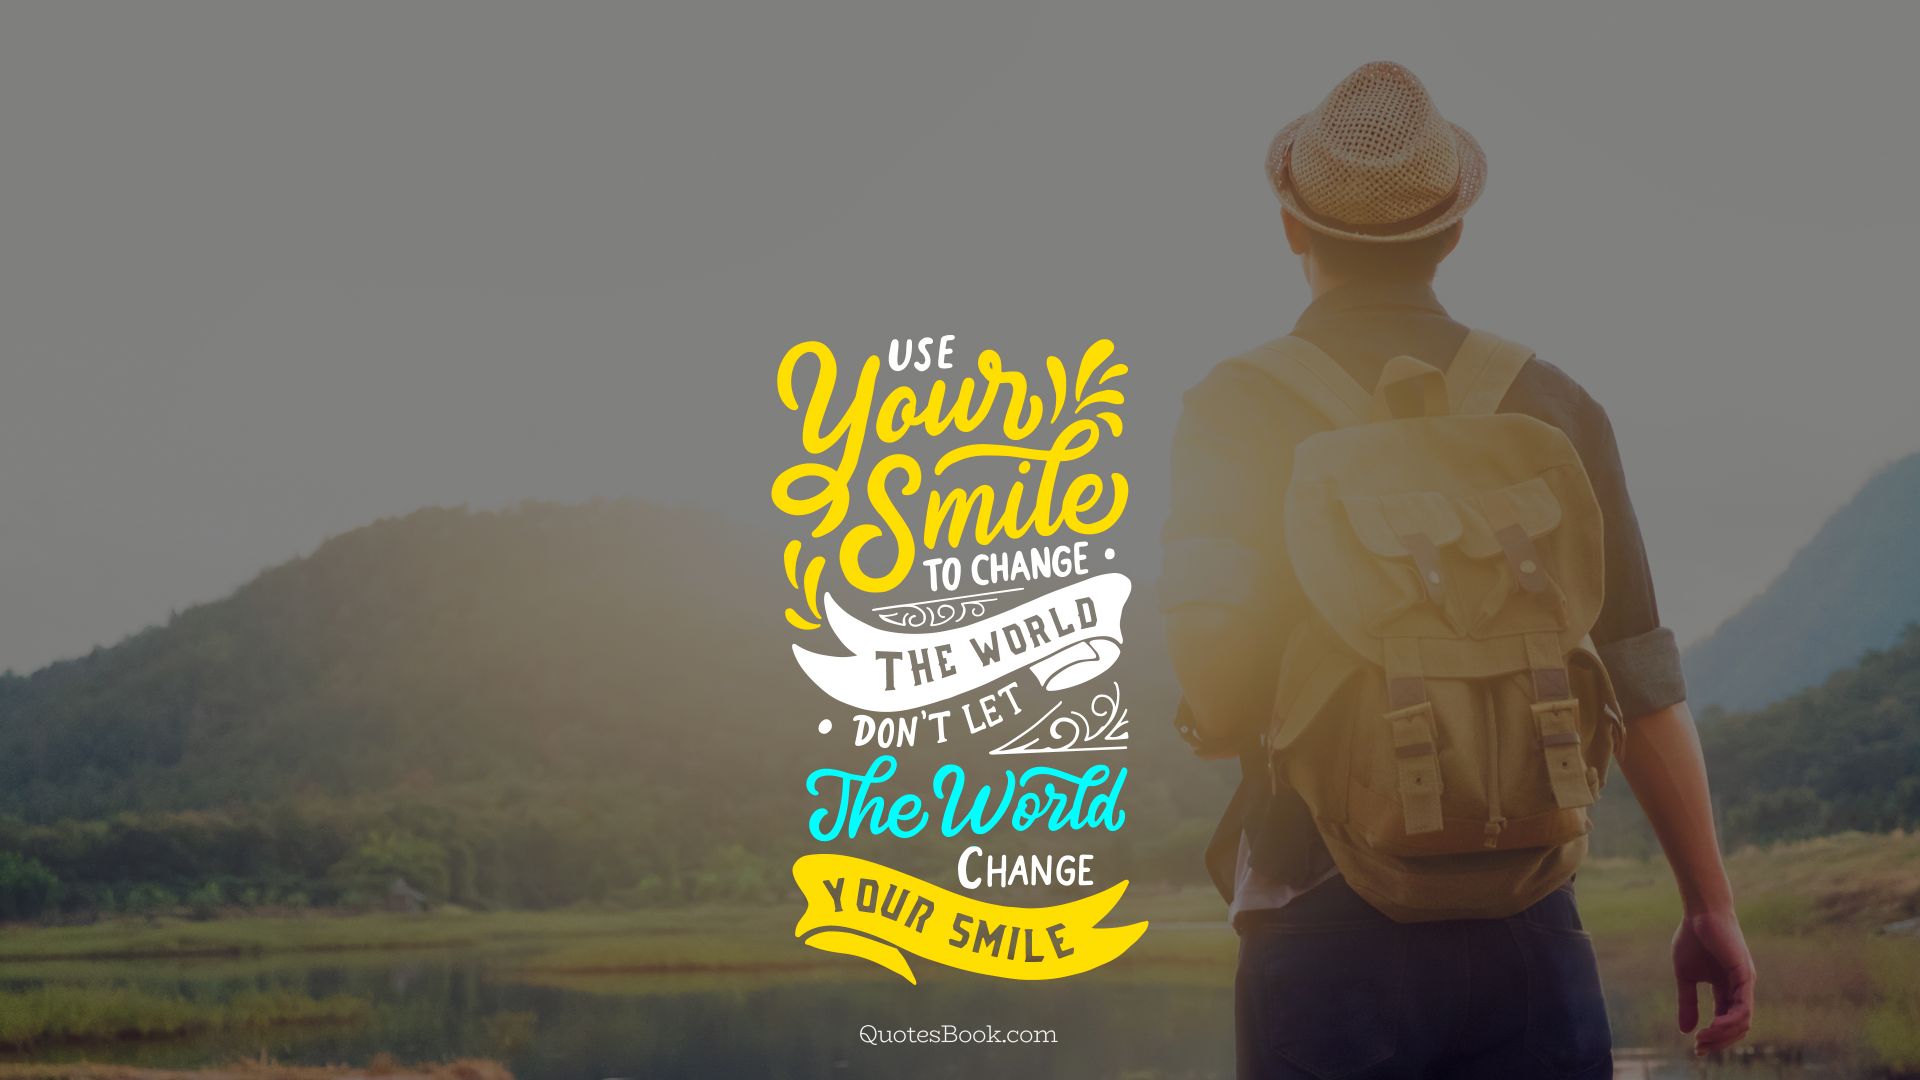 Use your smile to change the world. Don't let the world change your smile